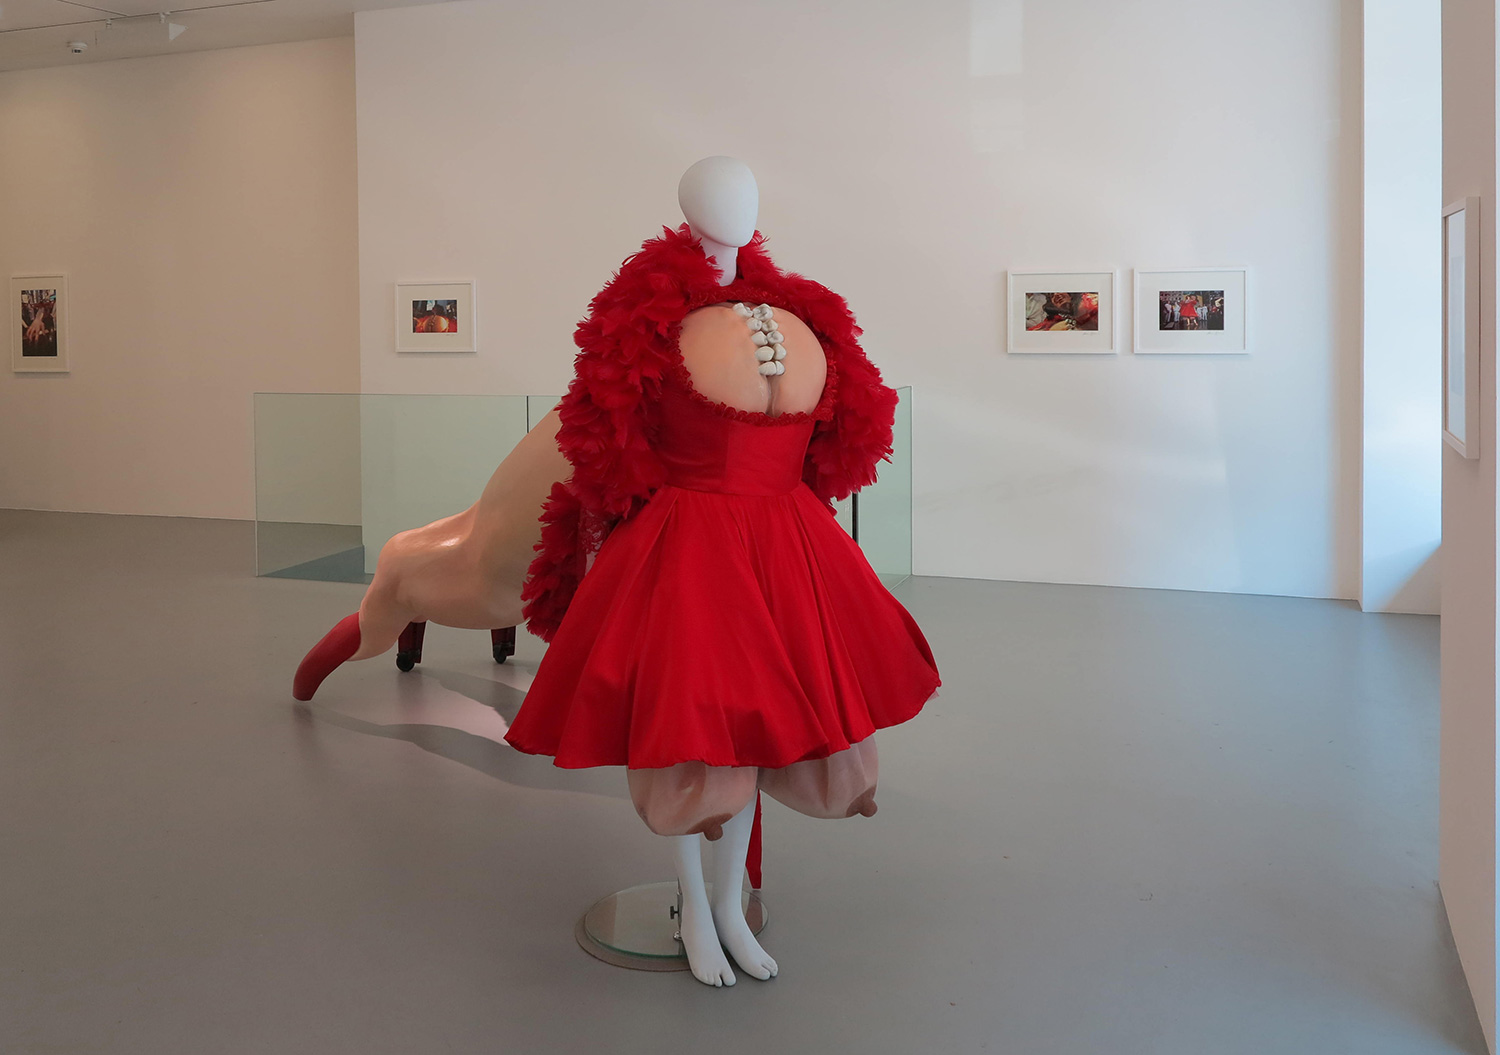 THE MUSE DISPLAYED AT KATZ CONTEMPORARY GALLERY IN ZURICH